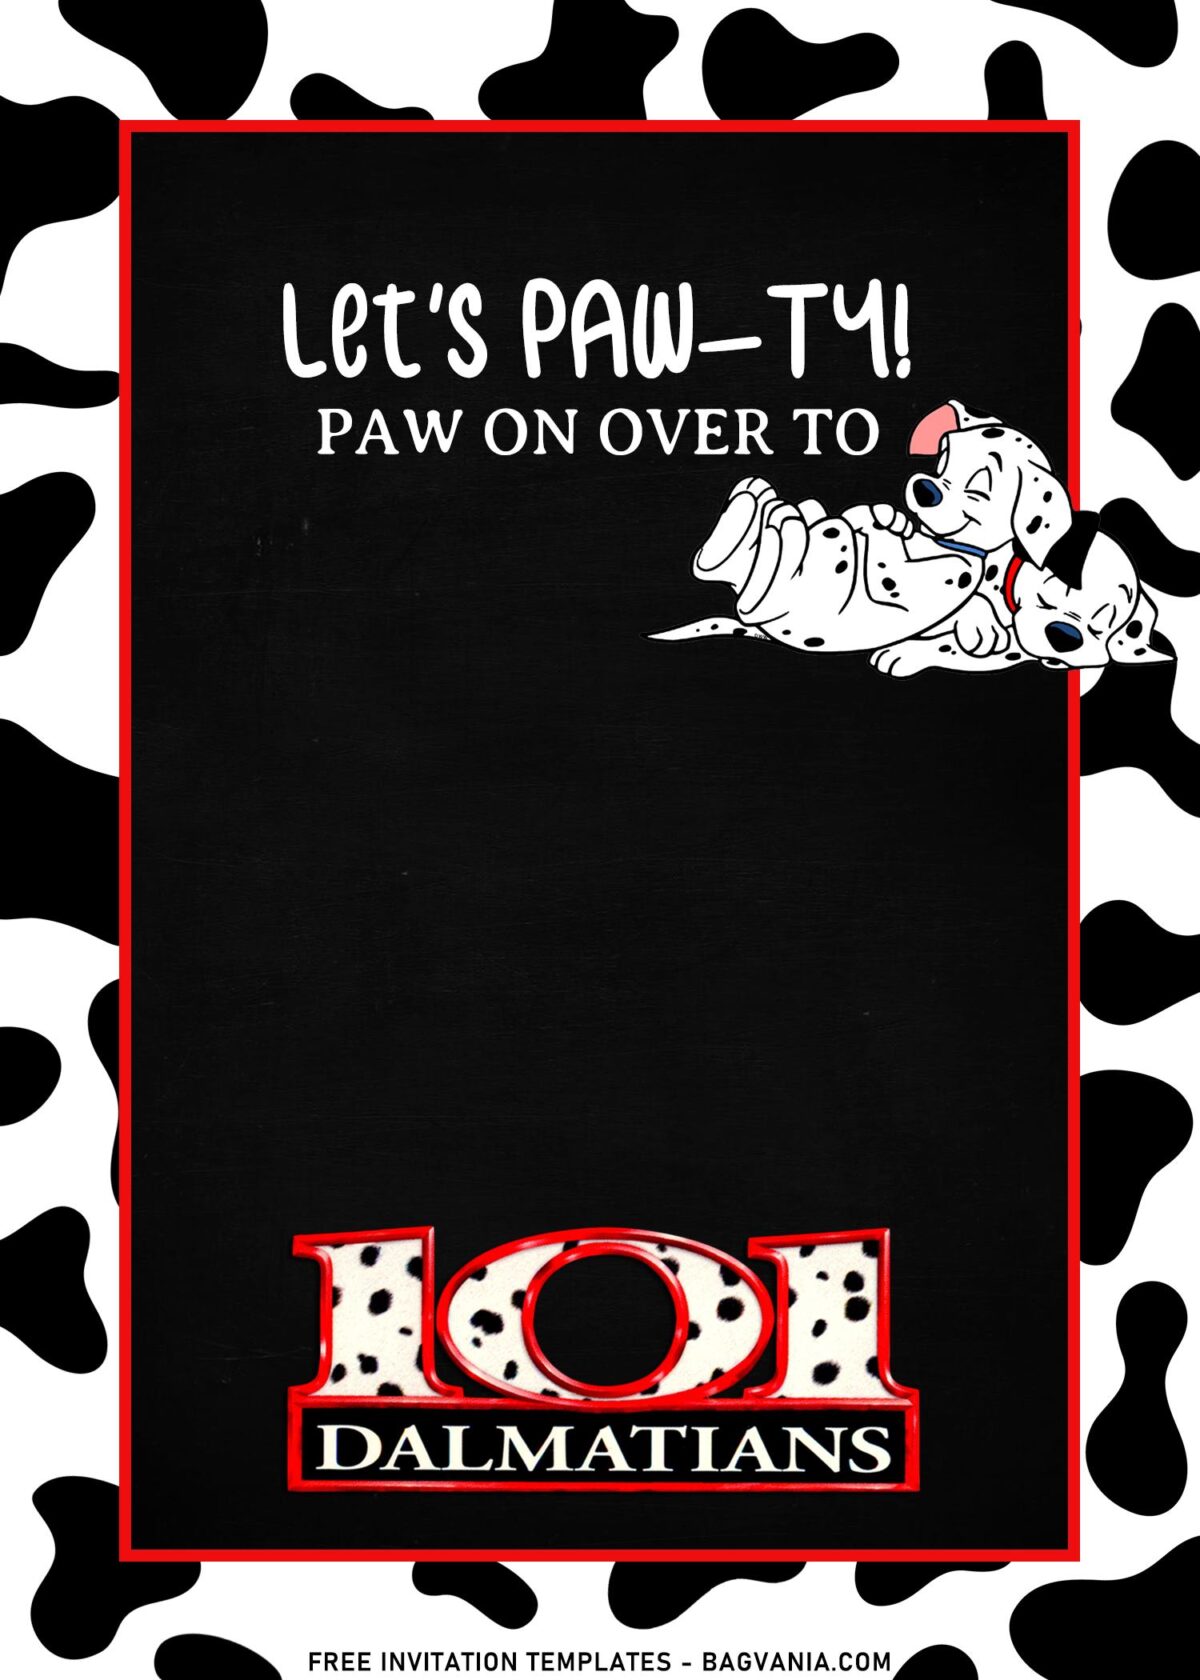 7+ Reminiscing 101 Dalmatians Birthday Invitation Templates with cute paw-ty wording